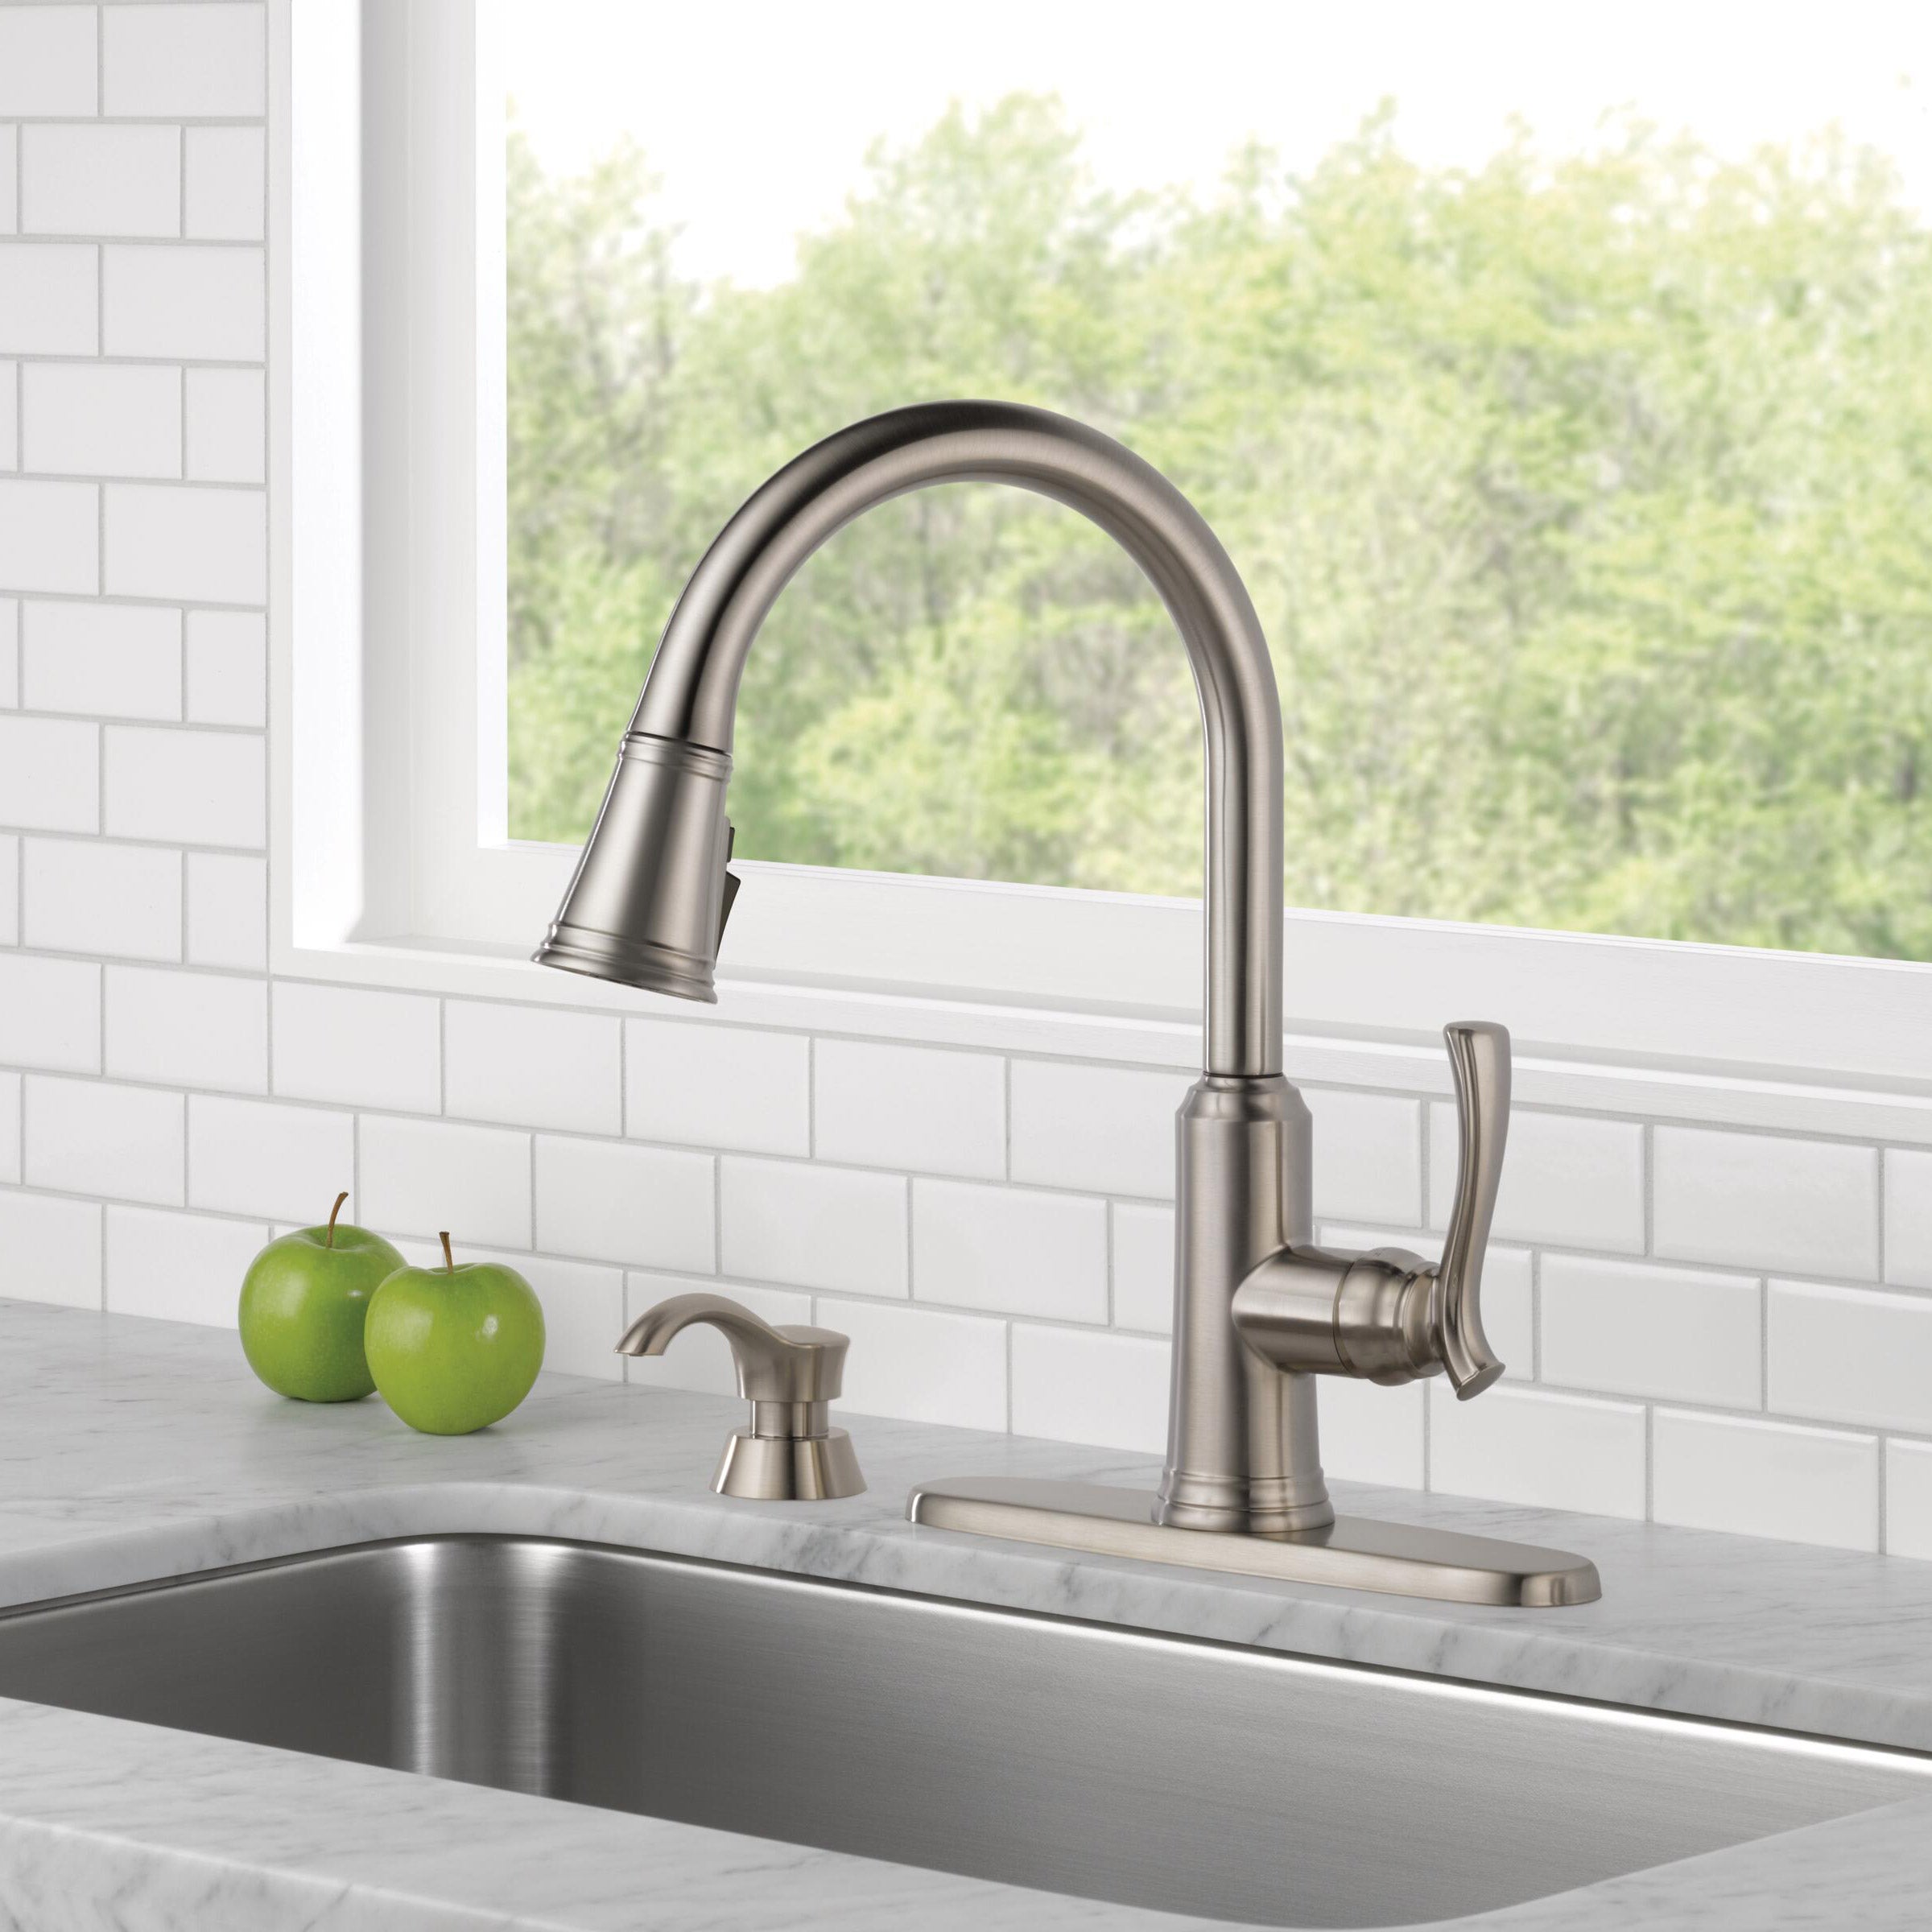 Delta Lakeview Single-Handle Pull-Down Sprayer Kitchen Faucet Image